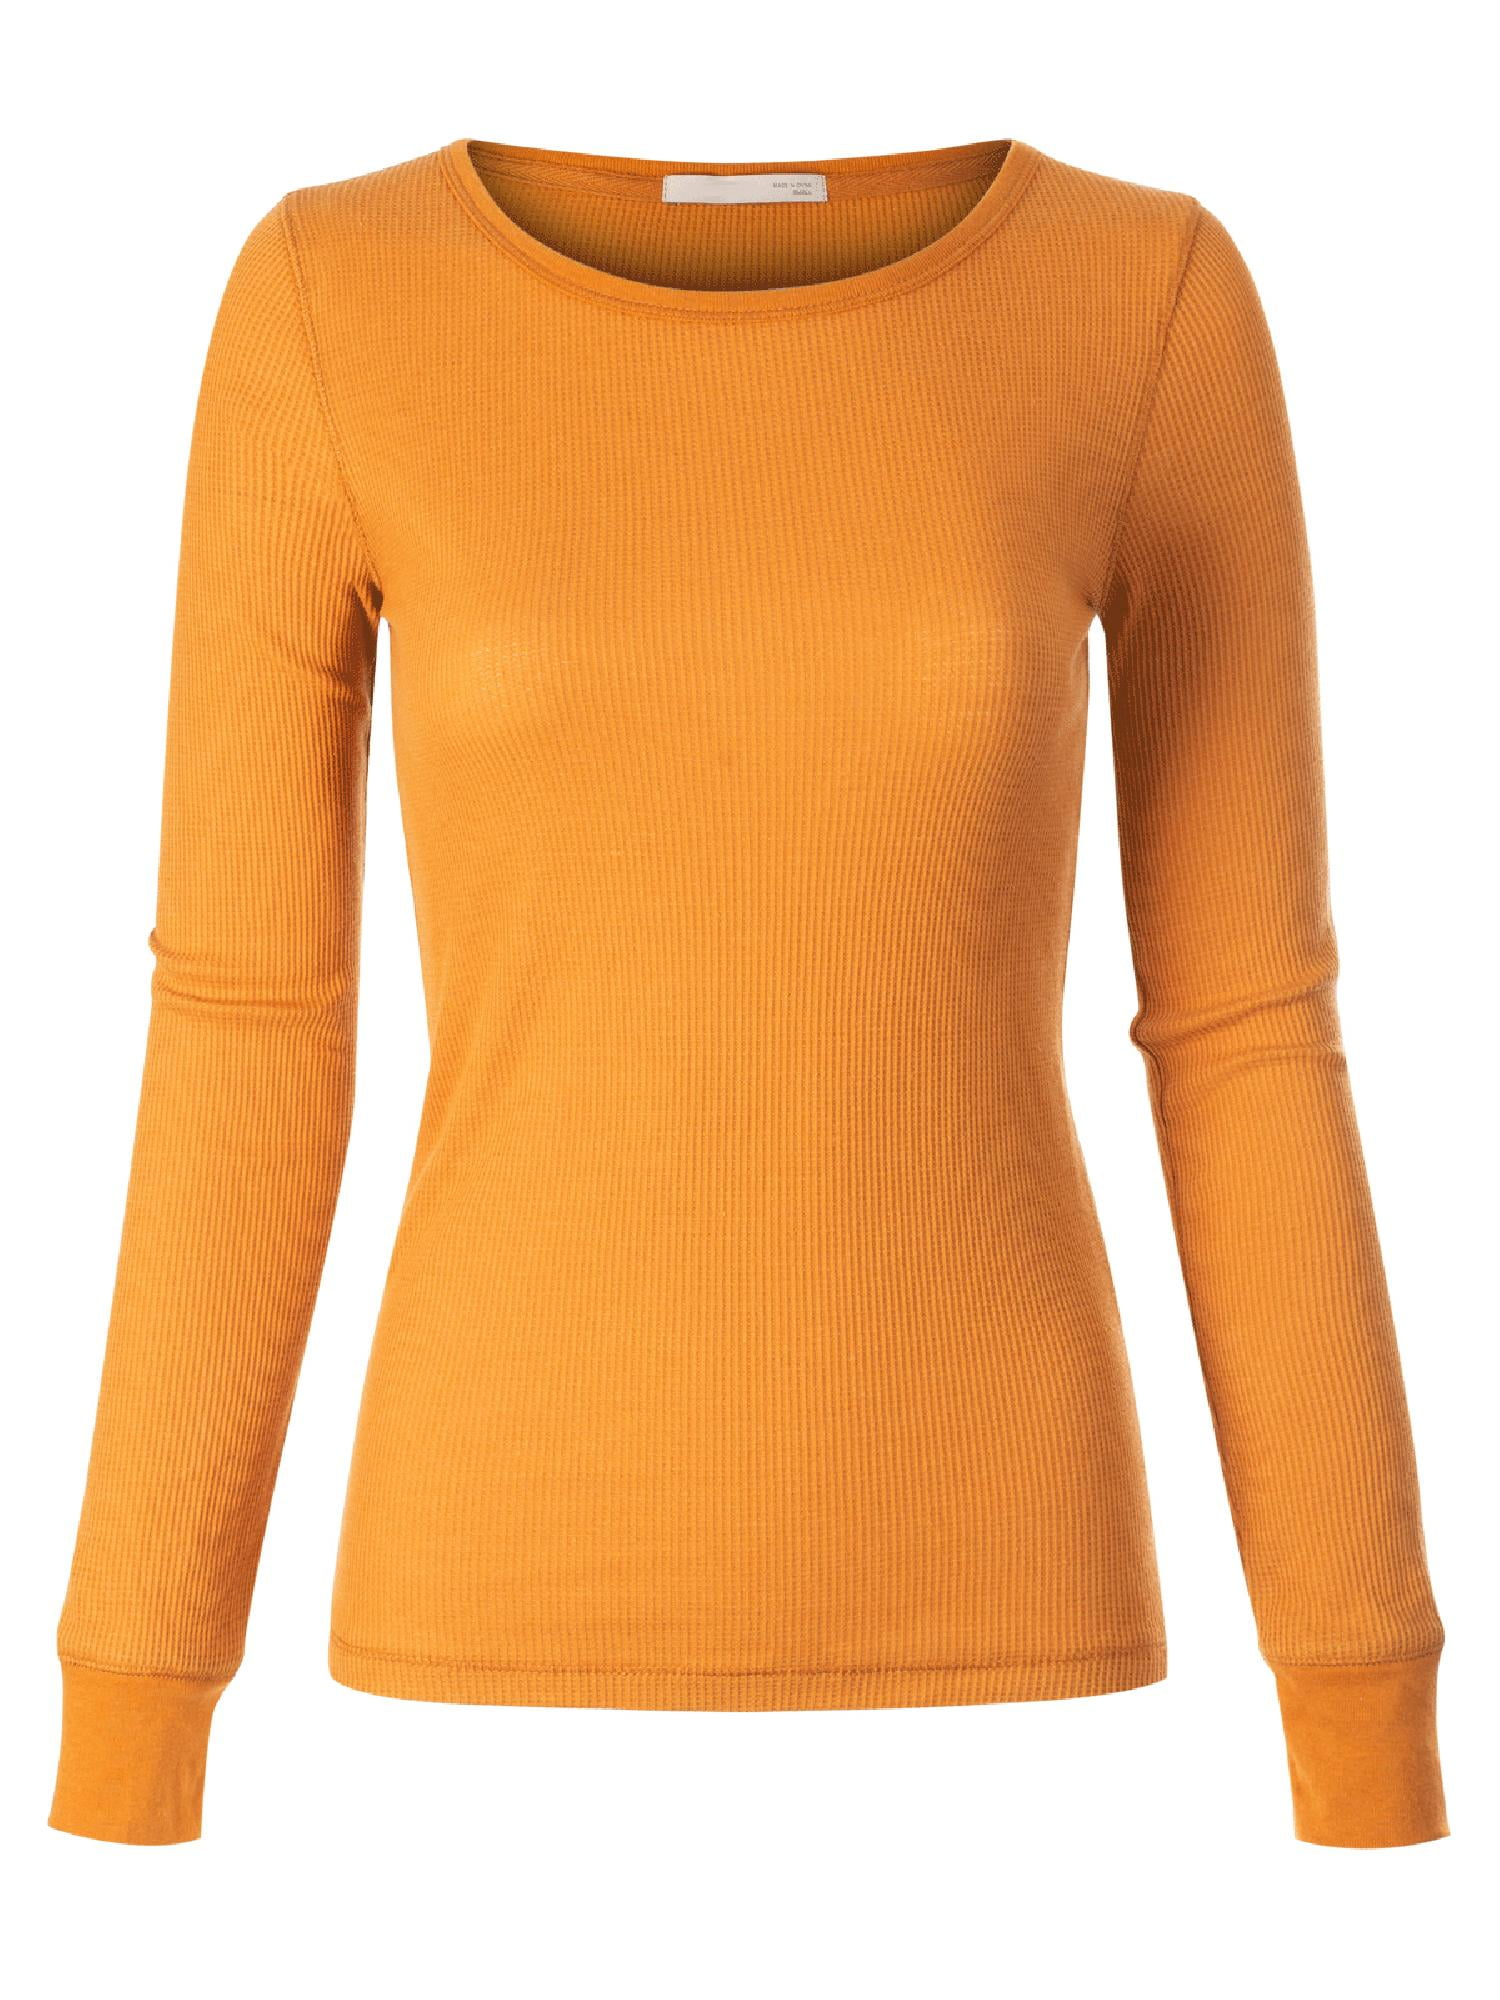 Made by Olivia - Made by Olivia Women's Plain Basic Round Crew Neck ...